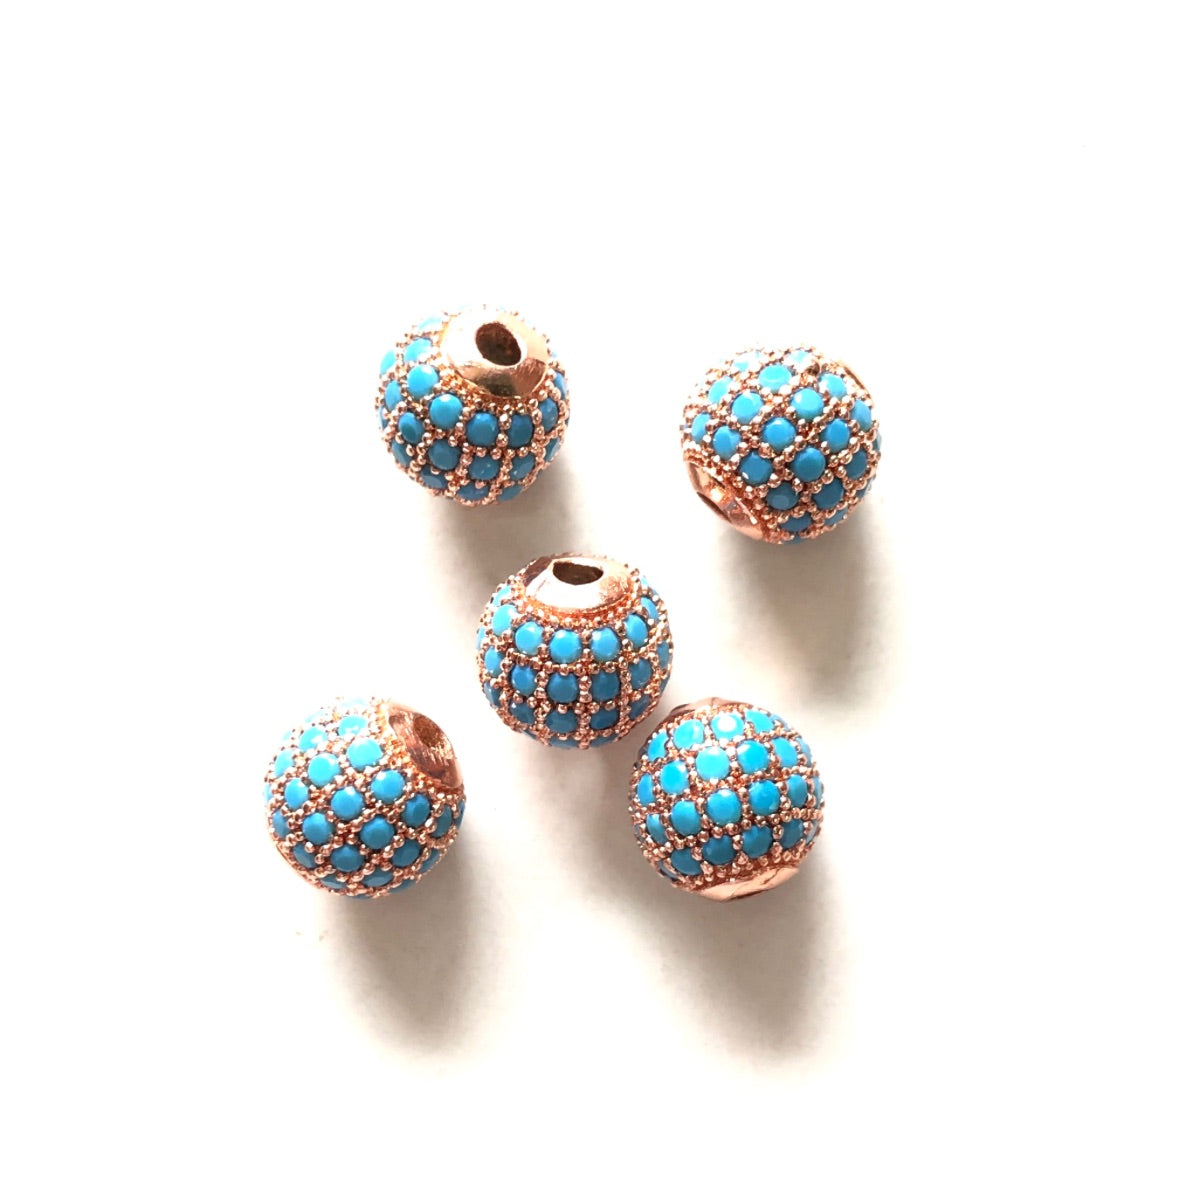 10pcs/lot 6mm, 8mm Colorful CZ Paved Ball Spacers Rose Gold Turquoise CZ Paved Spacers 6mm Beads 8mm Beads Ball Beads Colorful Zirconia New Spacers Arrivals Charms Beads Beyond